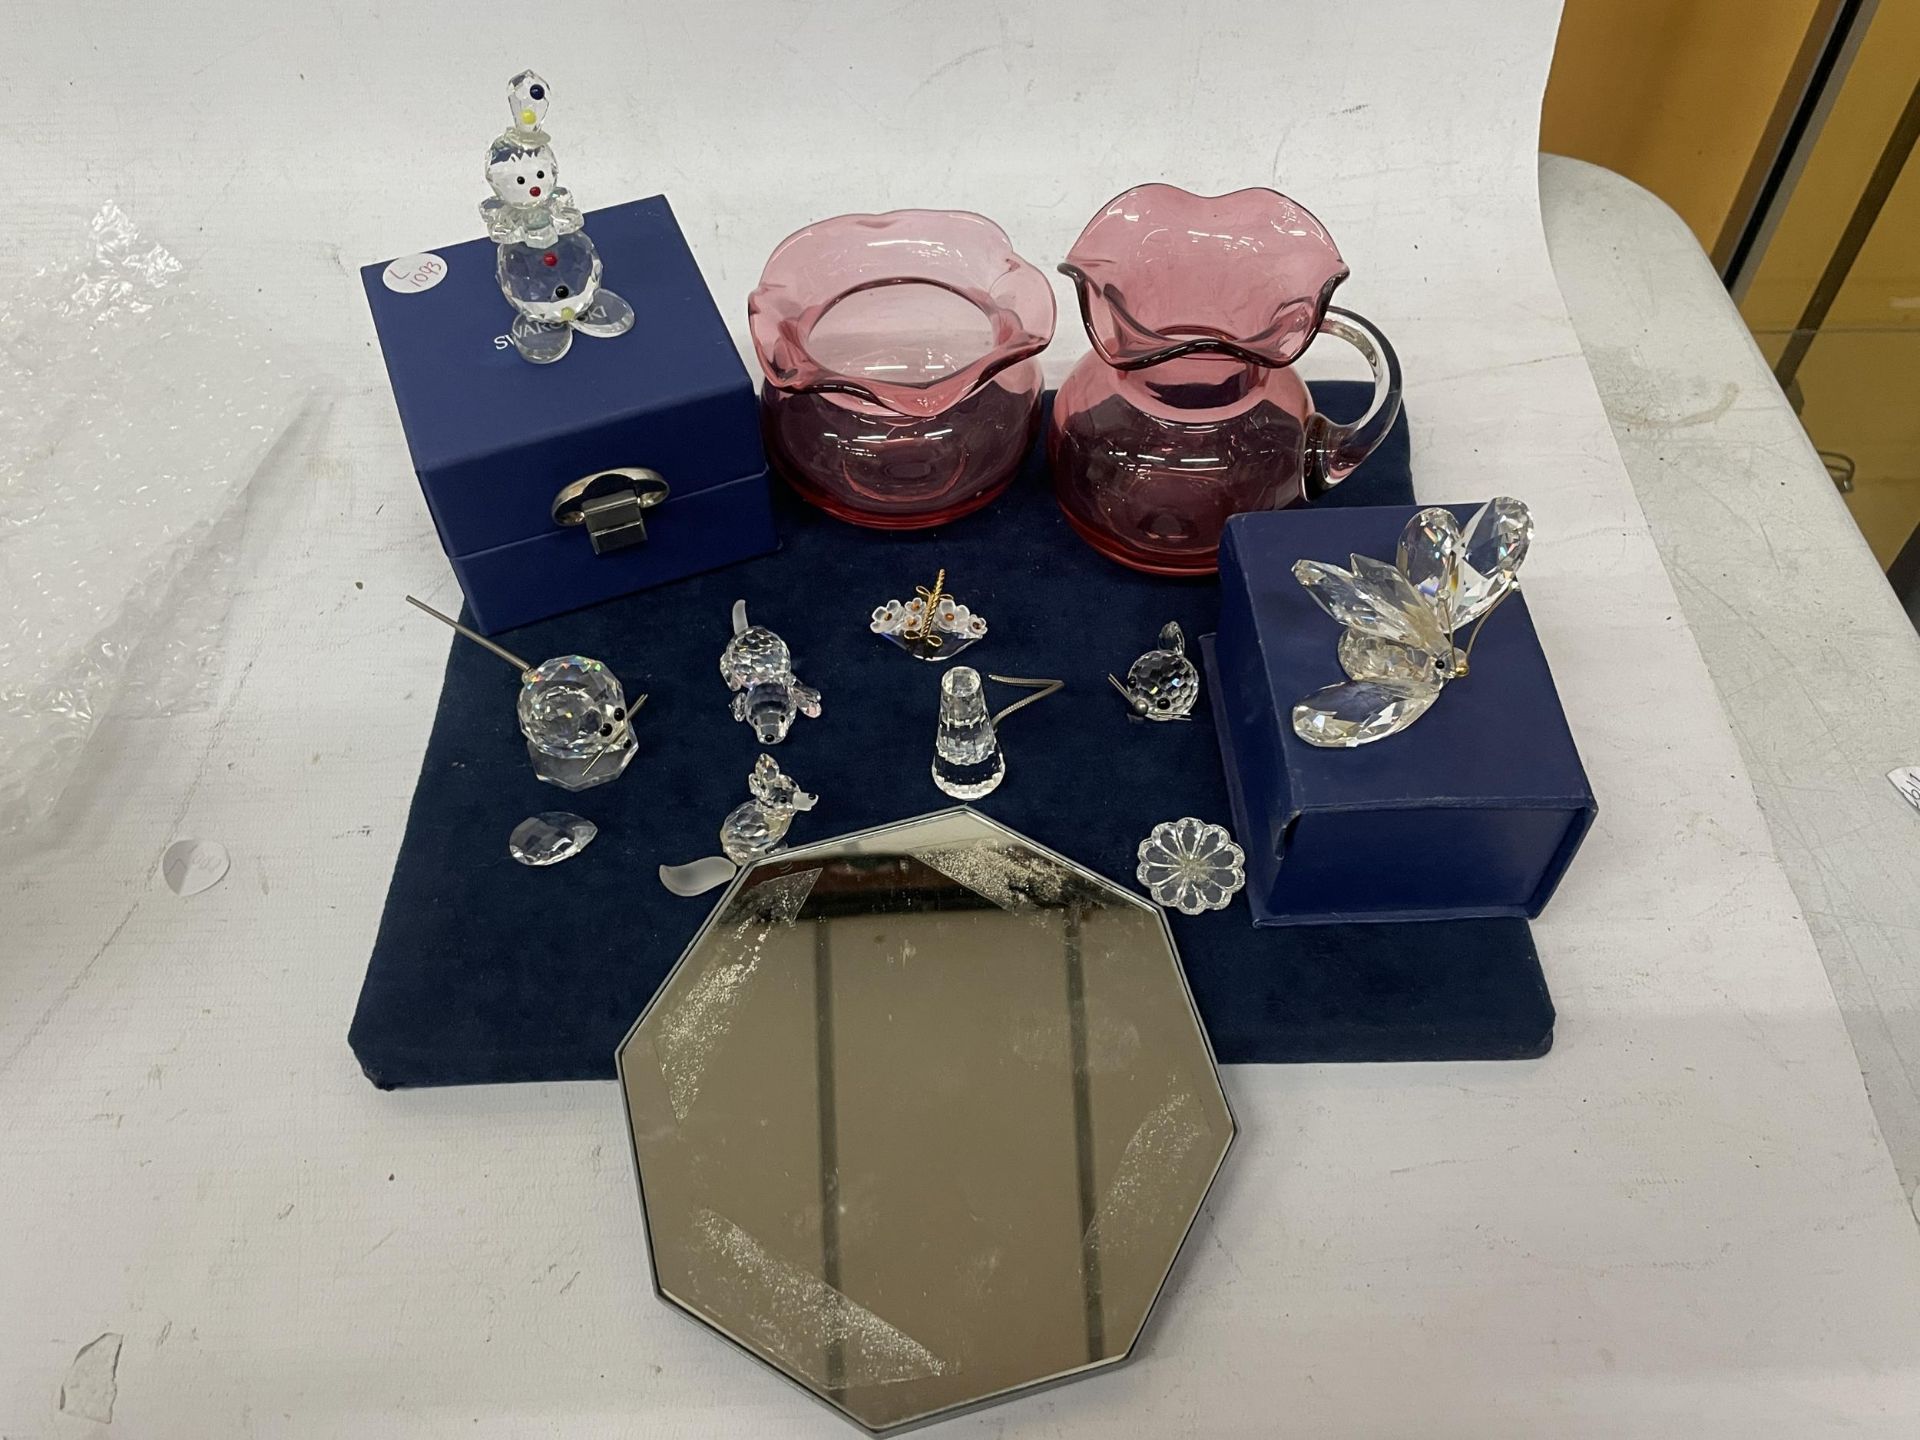 A COLLECTION OF SWAROVSKI CRYSTAL ORNAMENTS, SOME BOXED AND CRANBERRY GLASS ITEMS